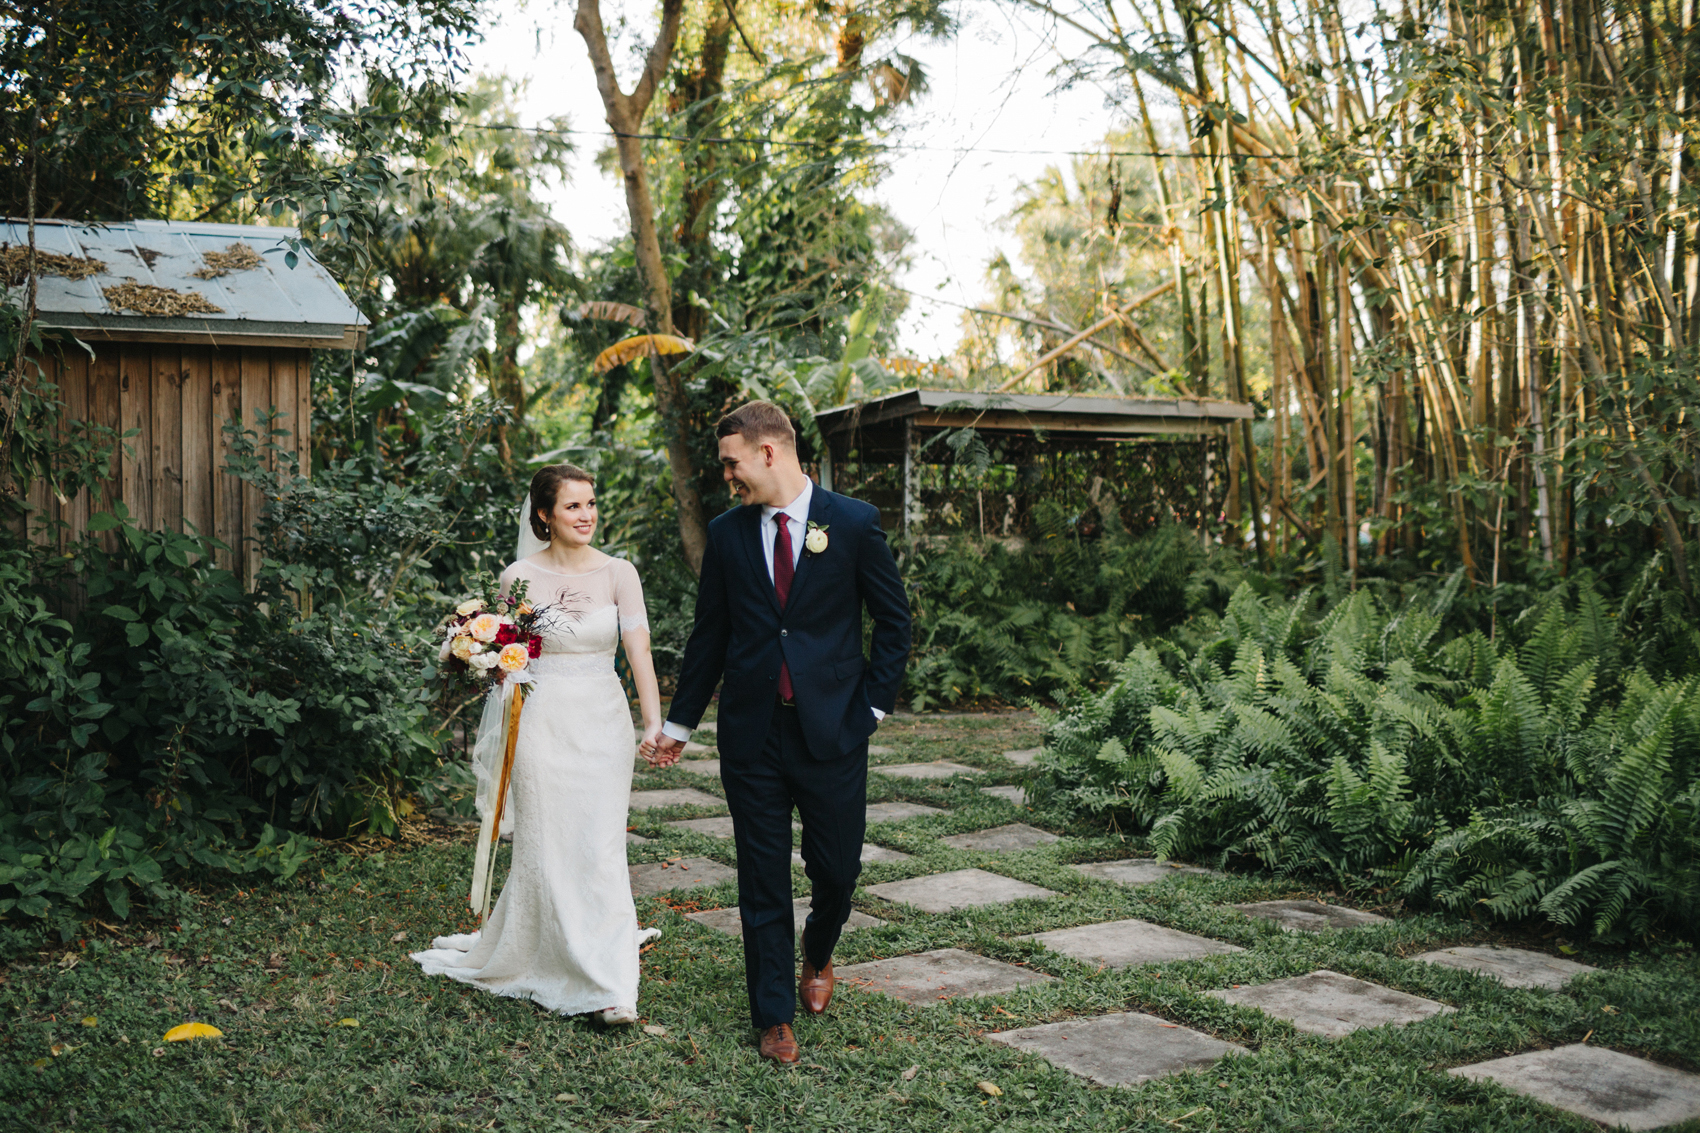 Candid wedding portrait of the bride and groom walking in the garden after their Florida outdoor ceremony